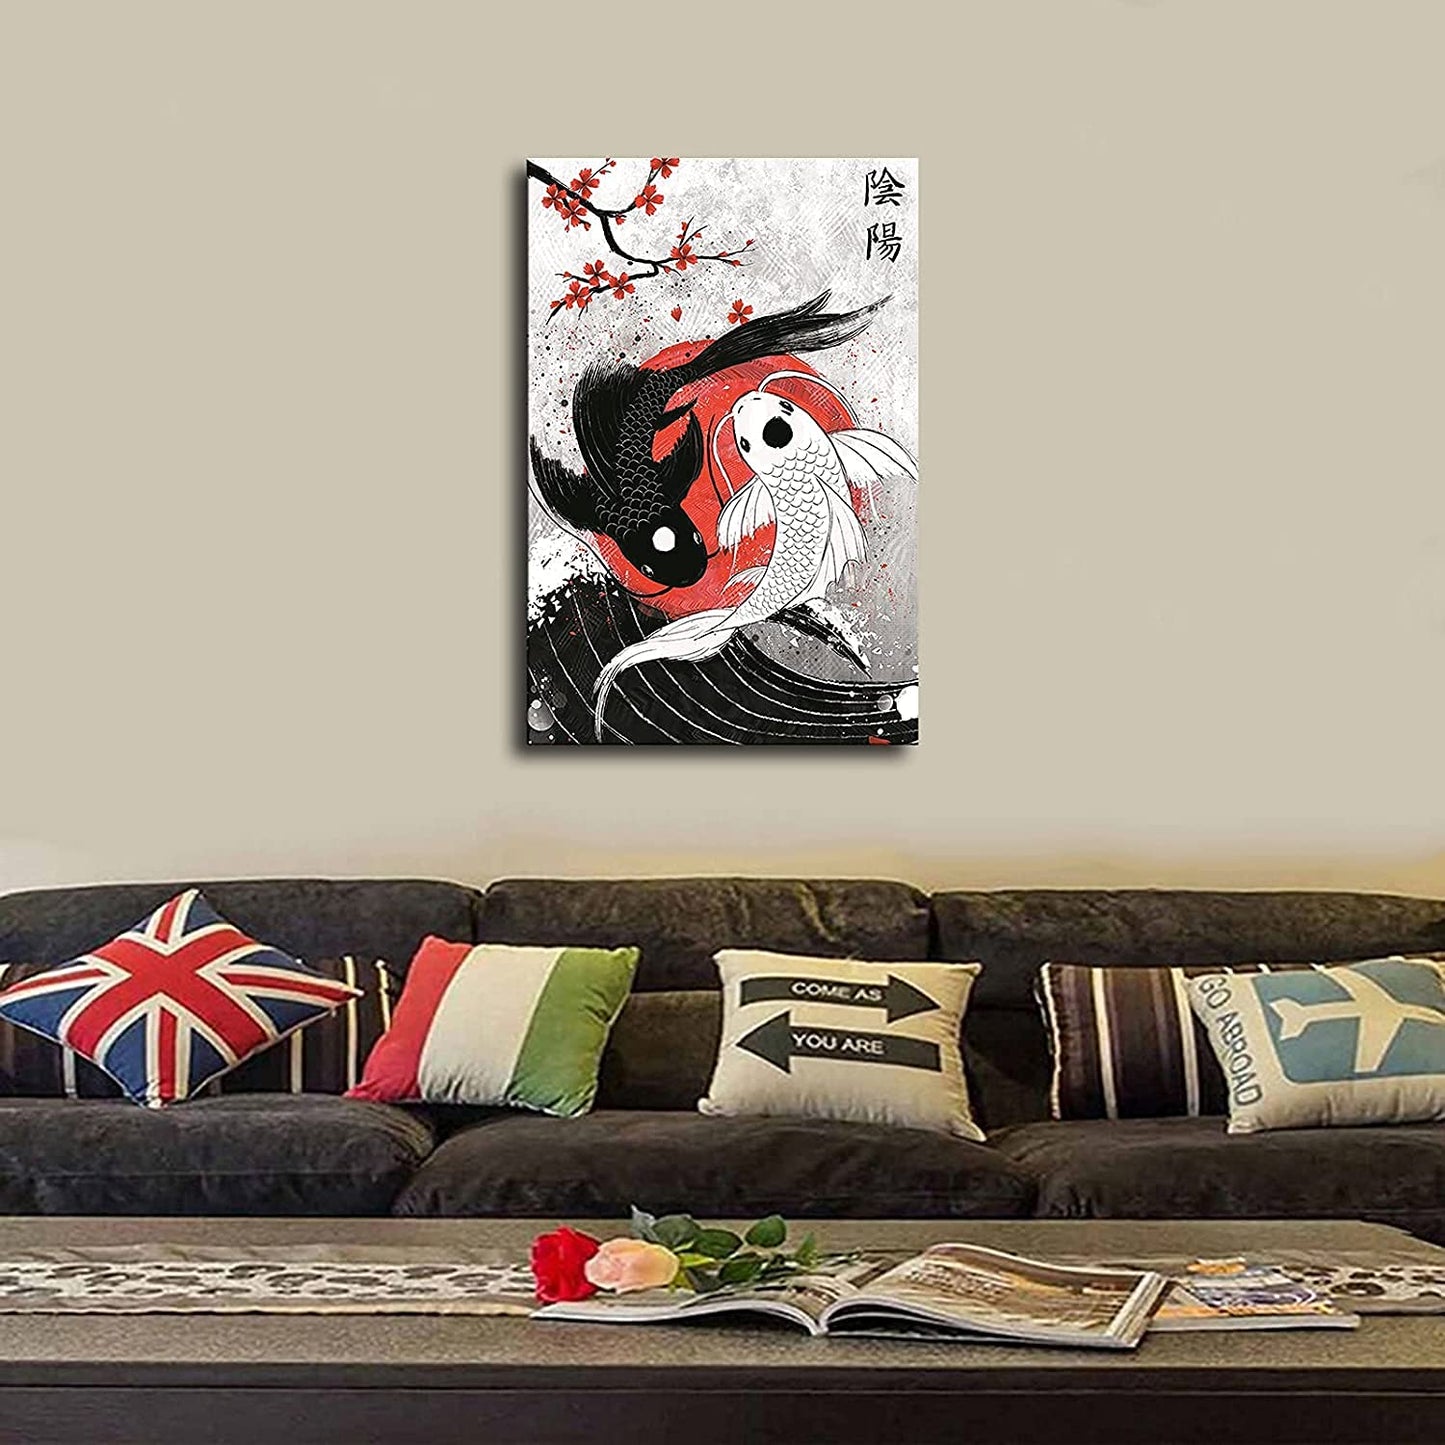 patient Koi Fish Wall Art Yin Yang Poster Canvas Printing|08 X 12 |Room Aesthetic|Bedroom Living Room Japanese Style Decoration (08×12inch), 08 x 12 in